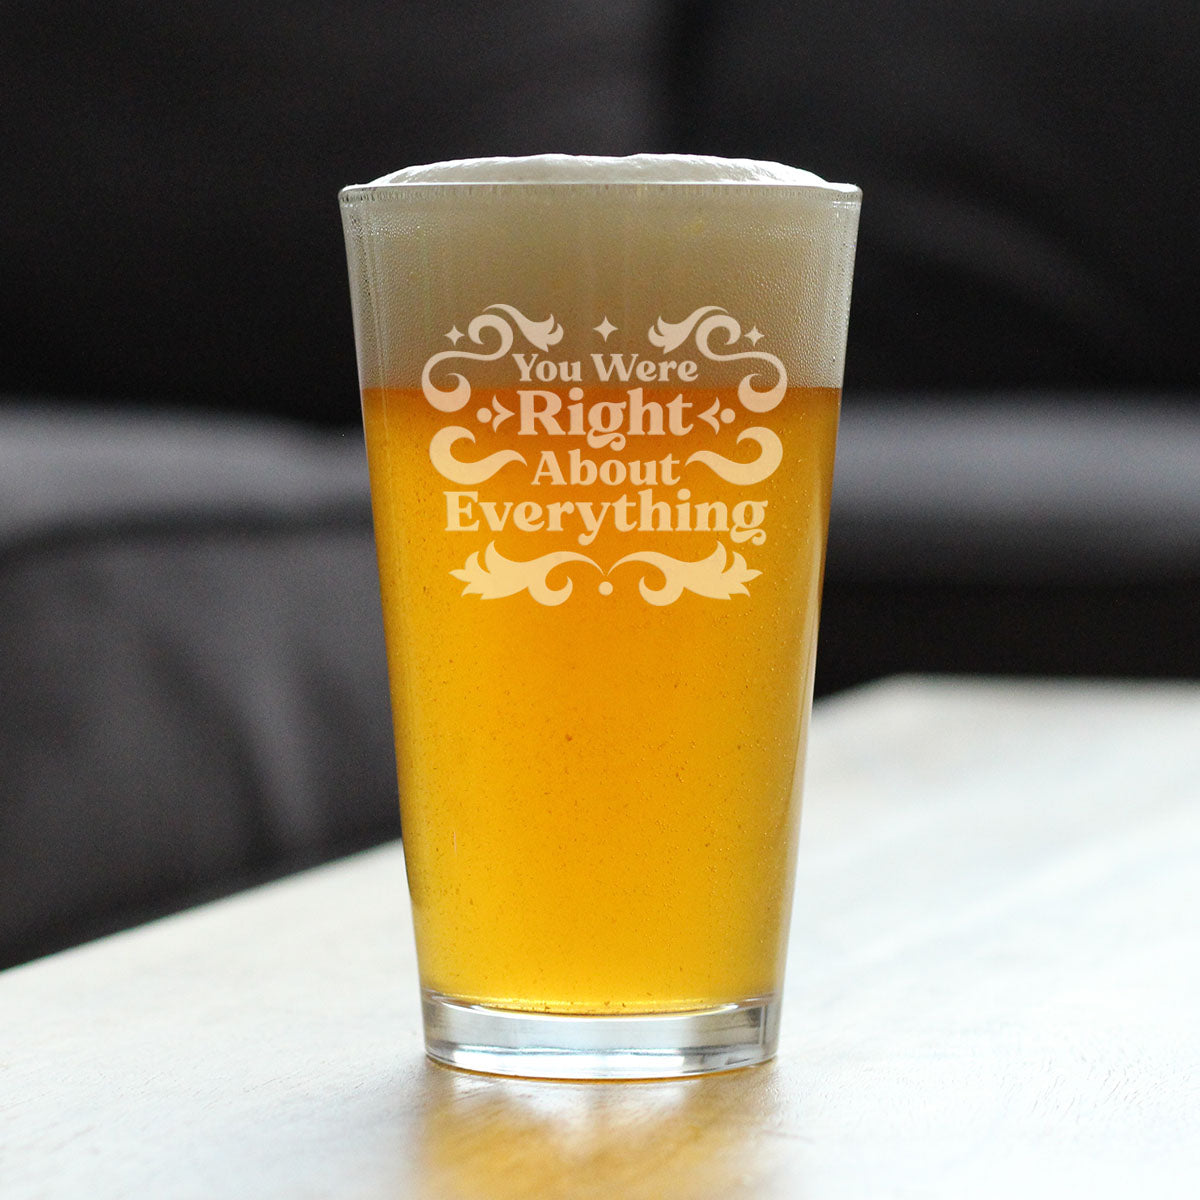 You Were Right About Everything - Funny Pint Glass for Beer - Drinking Birthday Gifts for Mom and Dad - 16 Oz